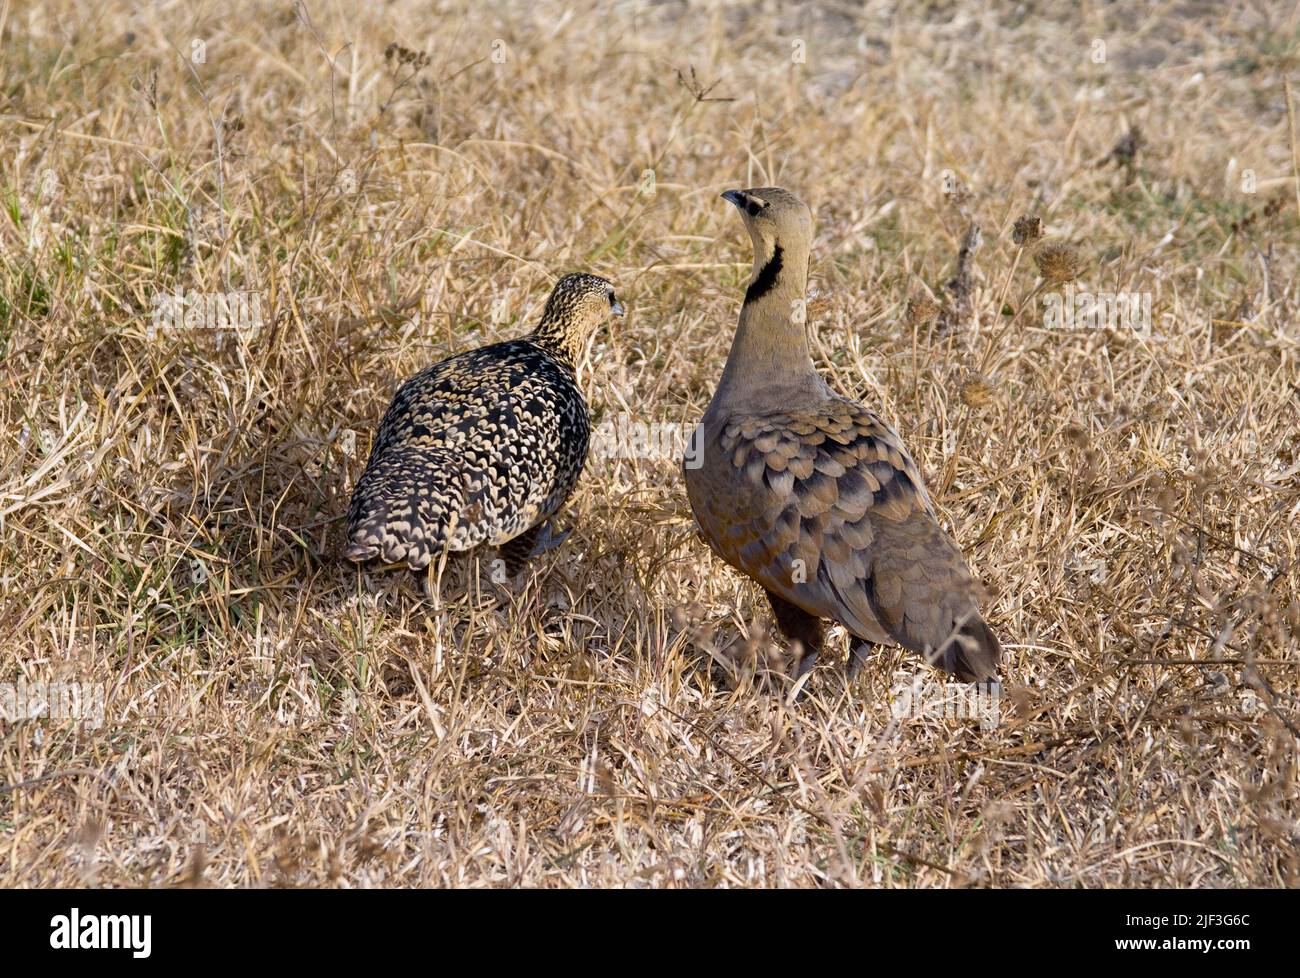 Pair of yellow-throated sandgrouse (Pterocles gutturalis) from Ngorongoro Crater, Tanzania. Stock Photo